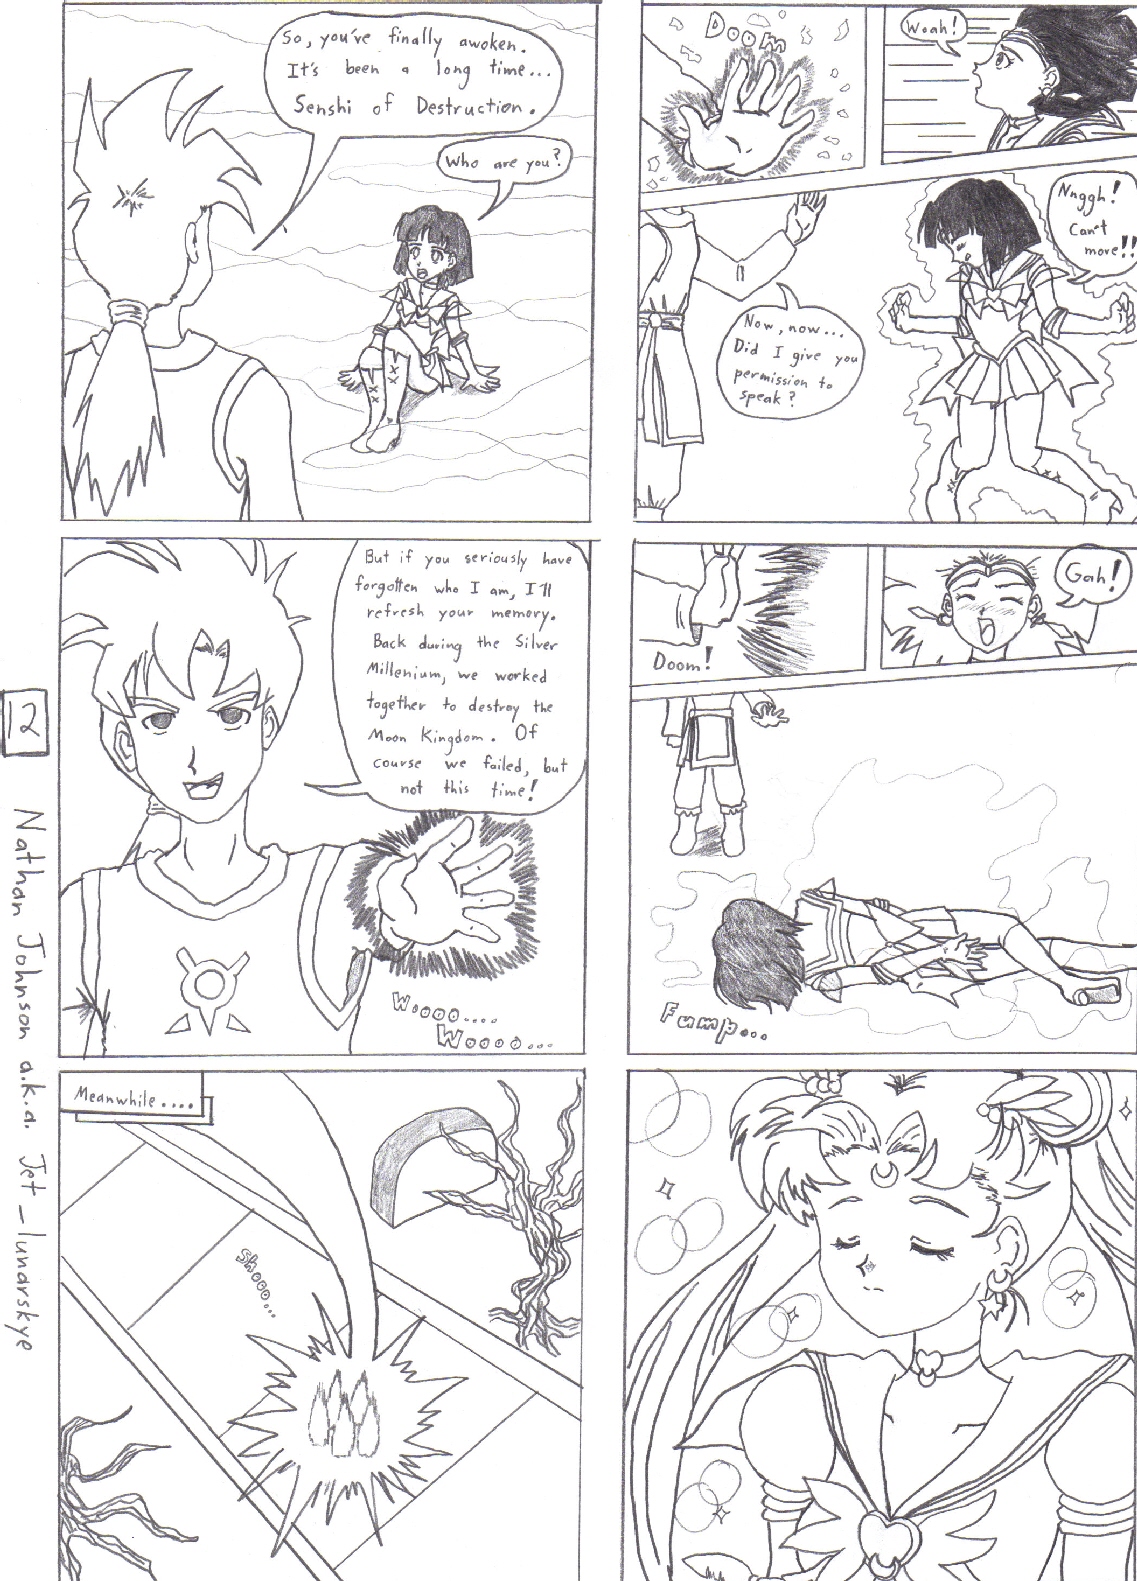 Sailor Moon Stars: The Nightmare Soldier Page 12 by Jet_lunarskye